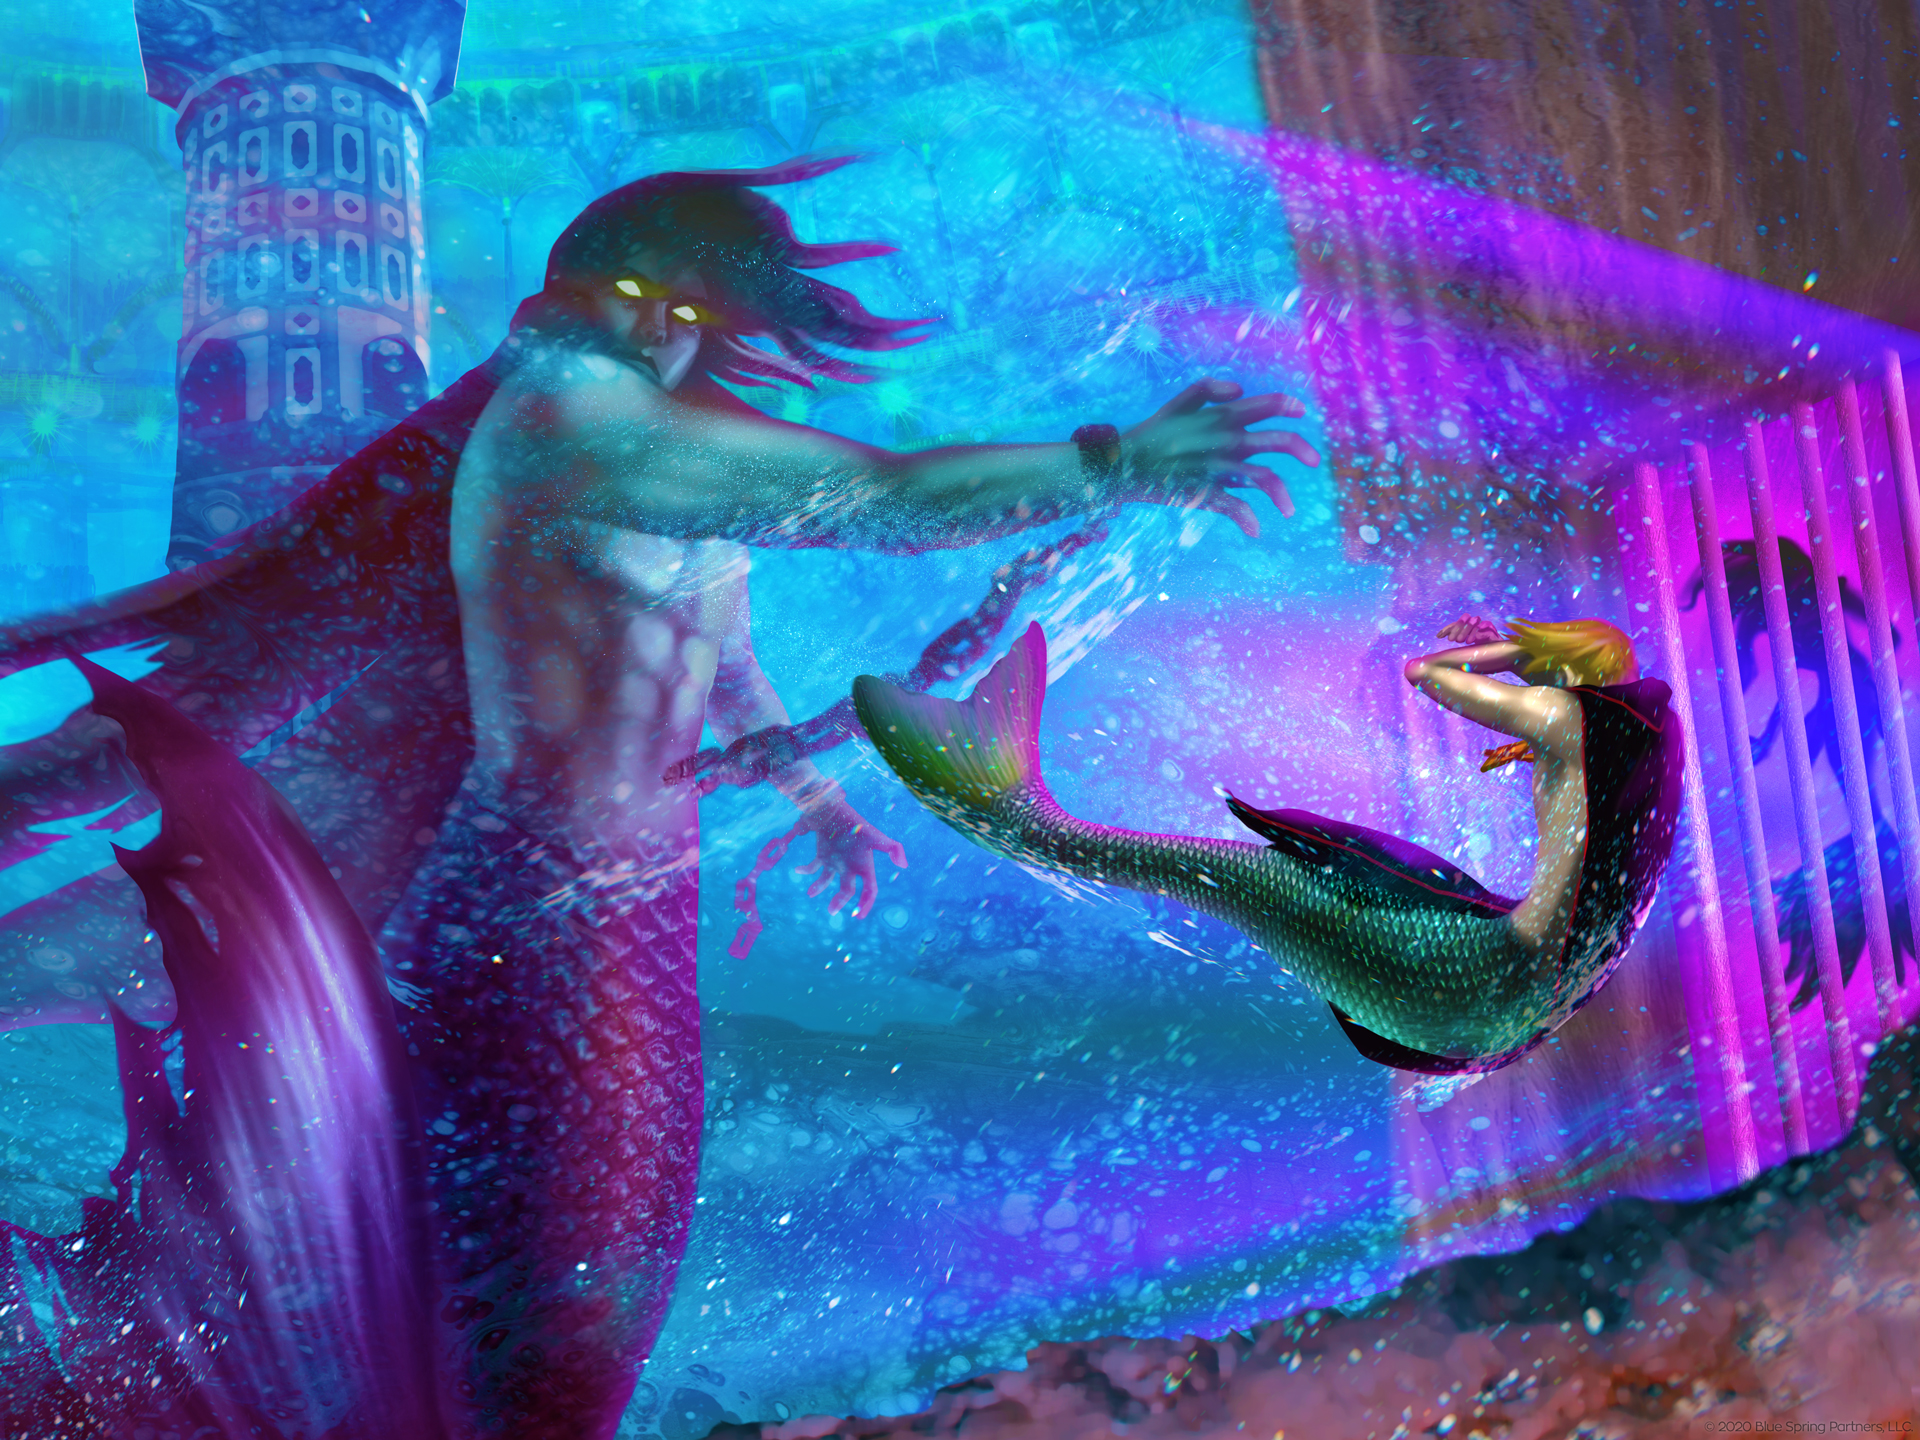 a mermaid story of epic proportions where Damon frees Calisto